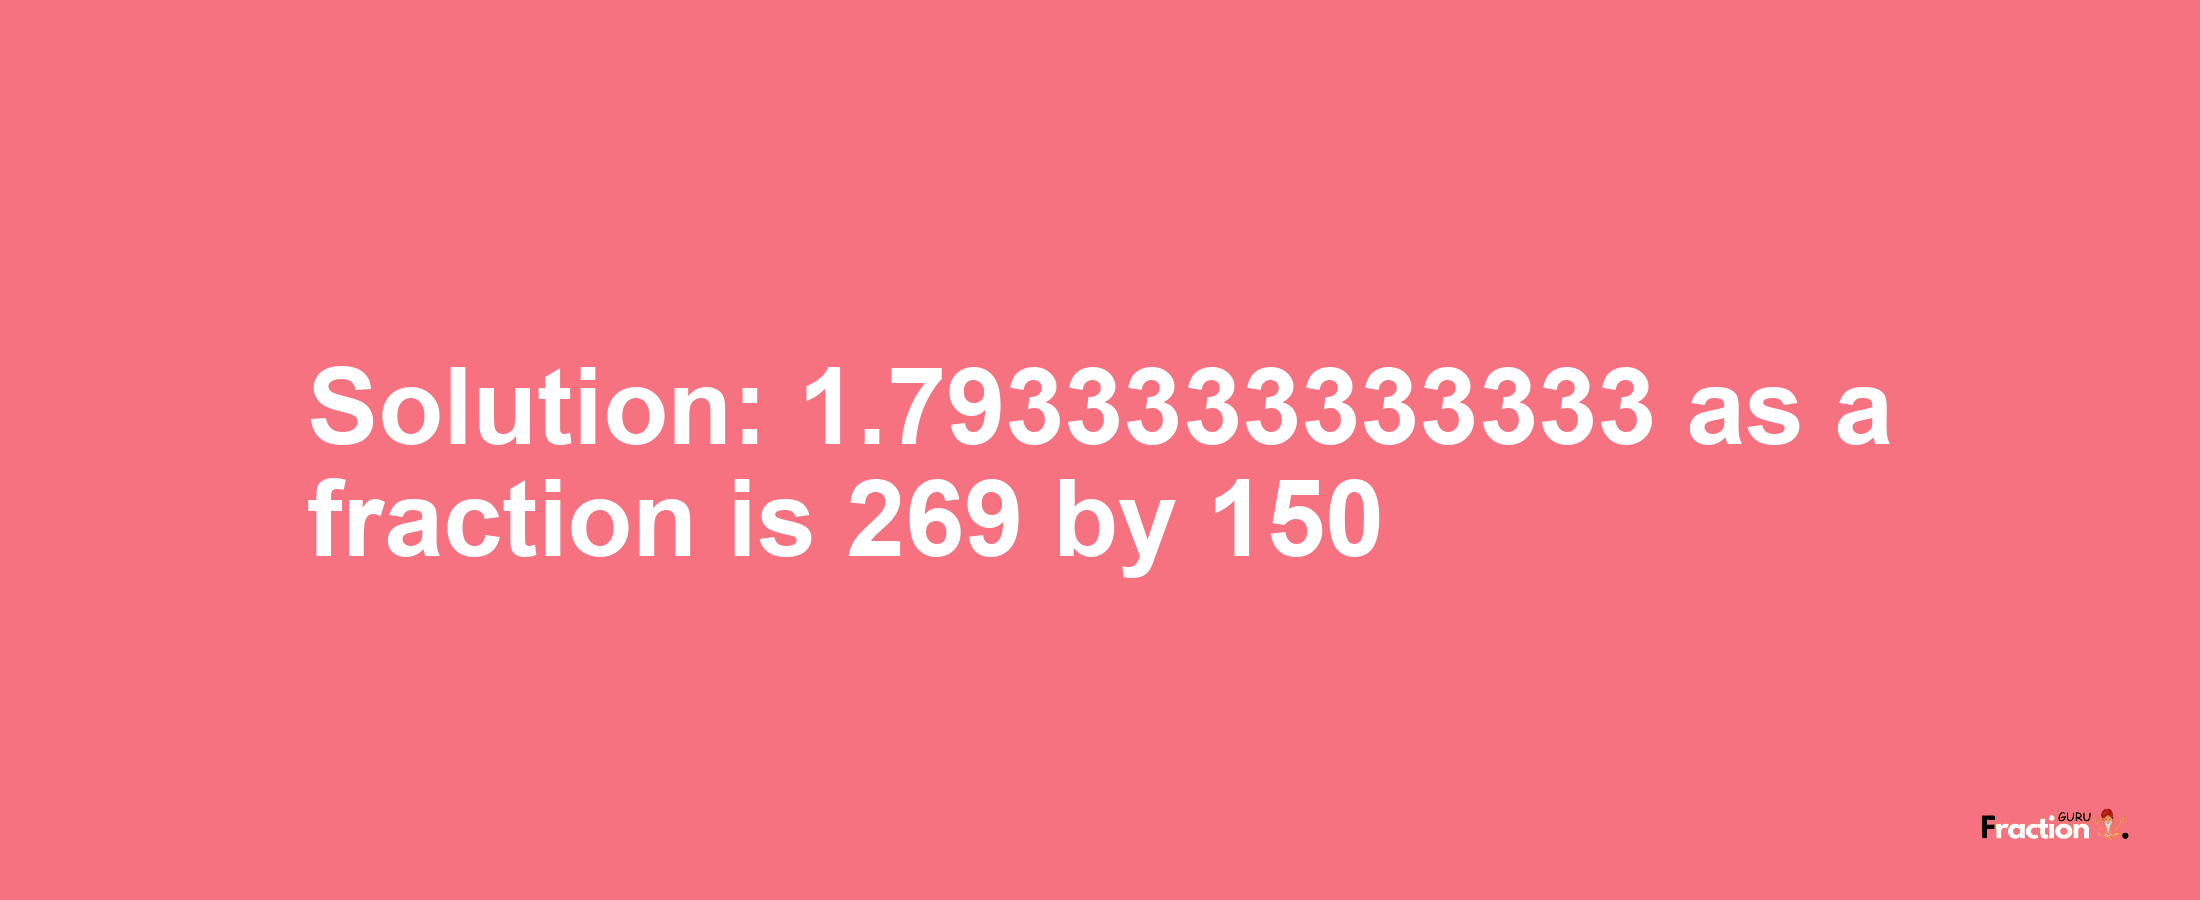 Solution:1.7933333333333 as a fraction is 269/150